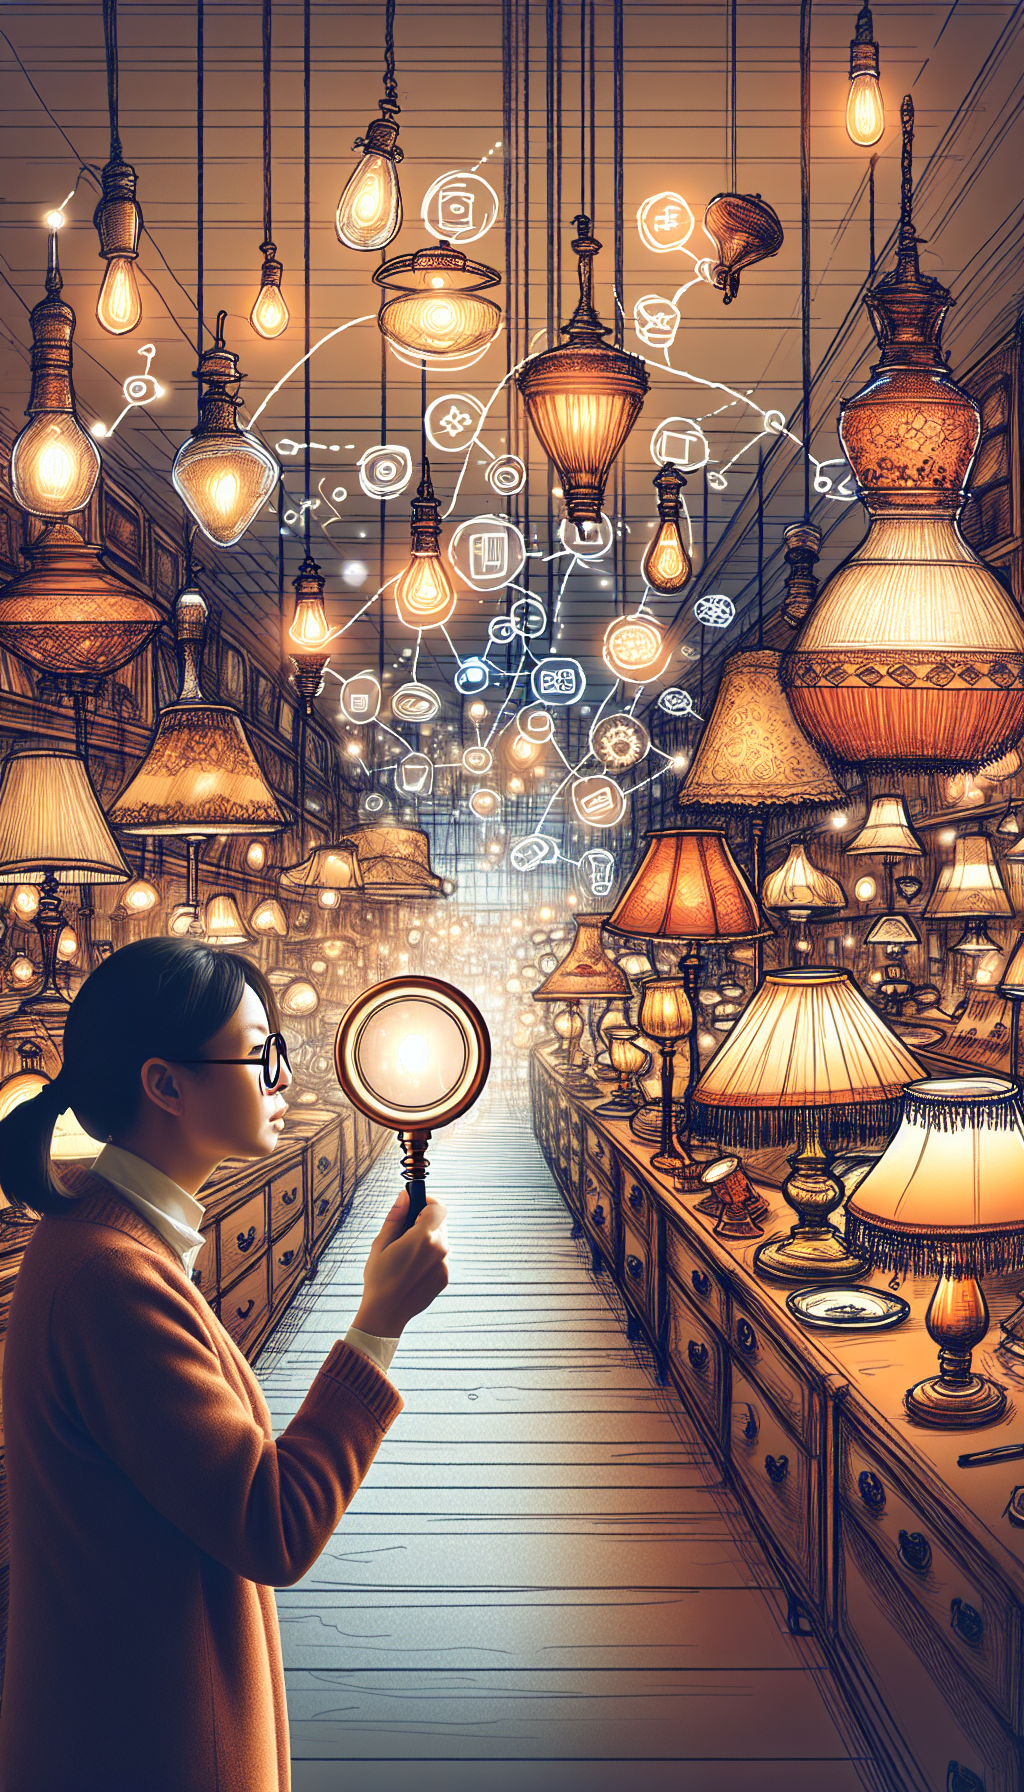 An illustration of a cozy, dimly-lit antique shop, where a variety of ornate lamps cast warm glows upon reflective surfaces, each beam highlighting a price tag with increasing values. Above, hand-drawn social media icons connect with dotted lines to the lamps, symbolizing online sales platforms, while in the foreground, a lamp collector showcases an appraising eye through a magnifying glass.